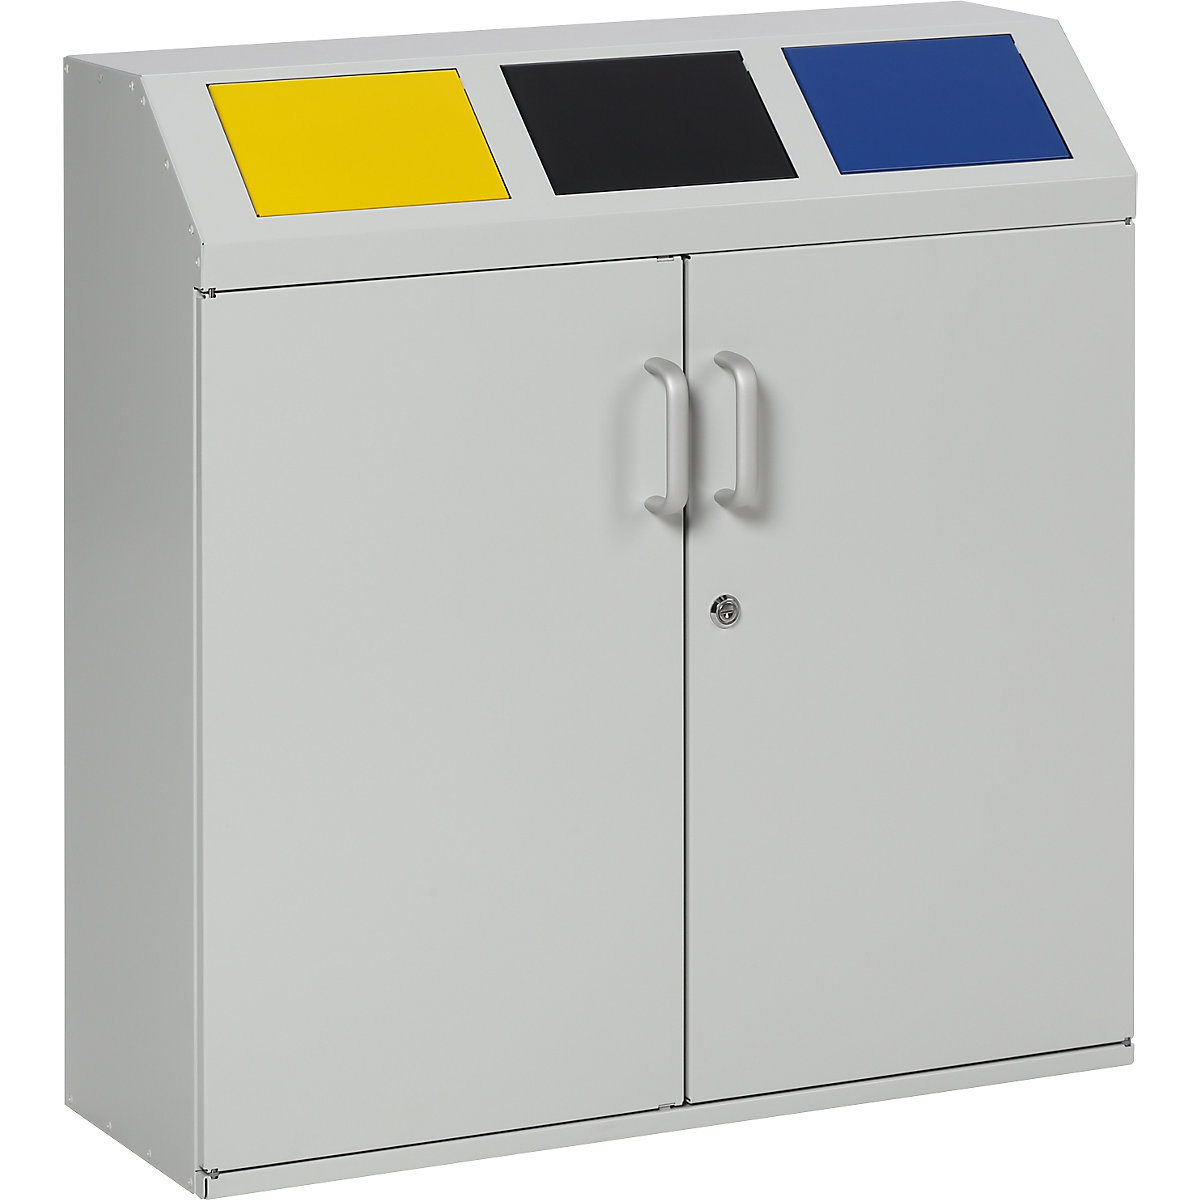 Recyclable waste collection cupboard - eurokraft pro